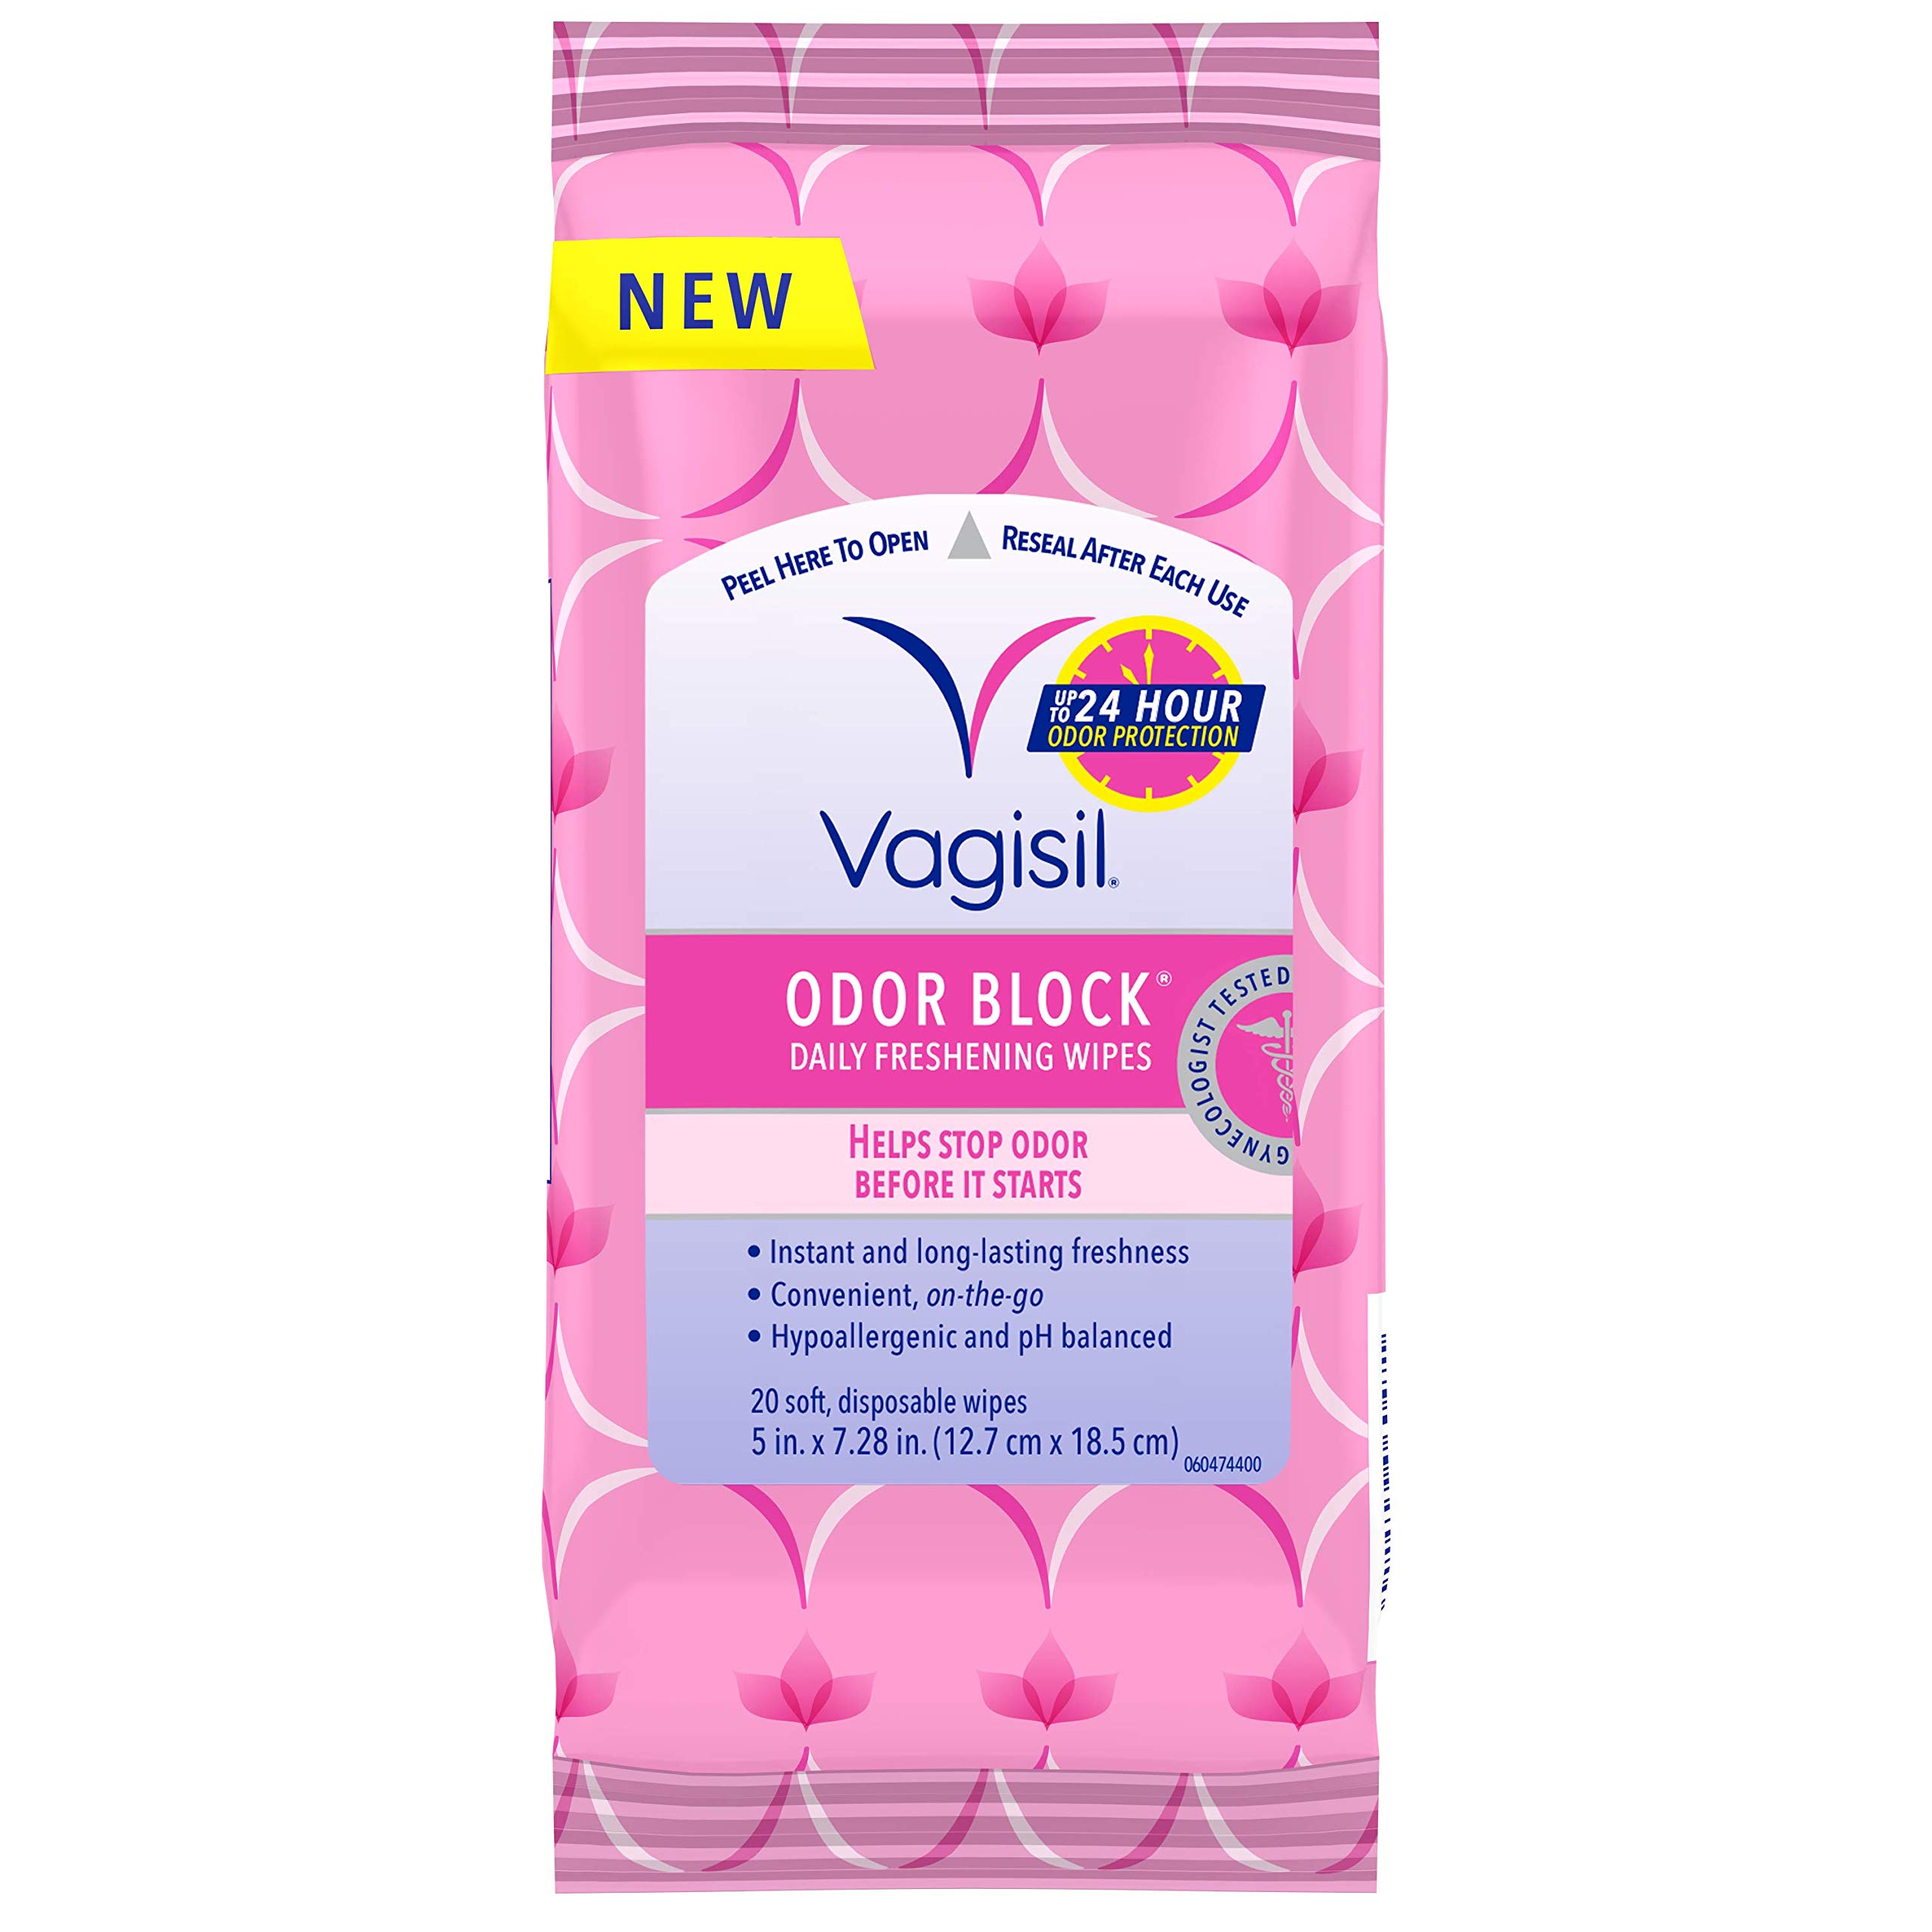 Vagisil Odor Block Daily Freshening Wipes for Feminine Hygiene in Resealable Pouch, Gynecologist Tested & Hypoallergenic, 20 Wipes (Pack of 1)